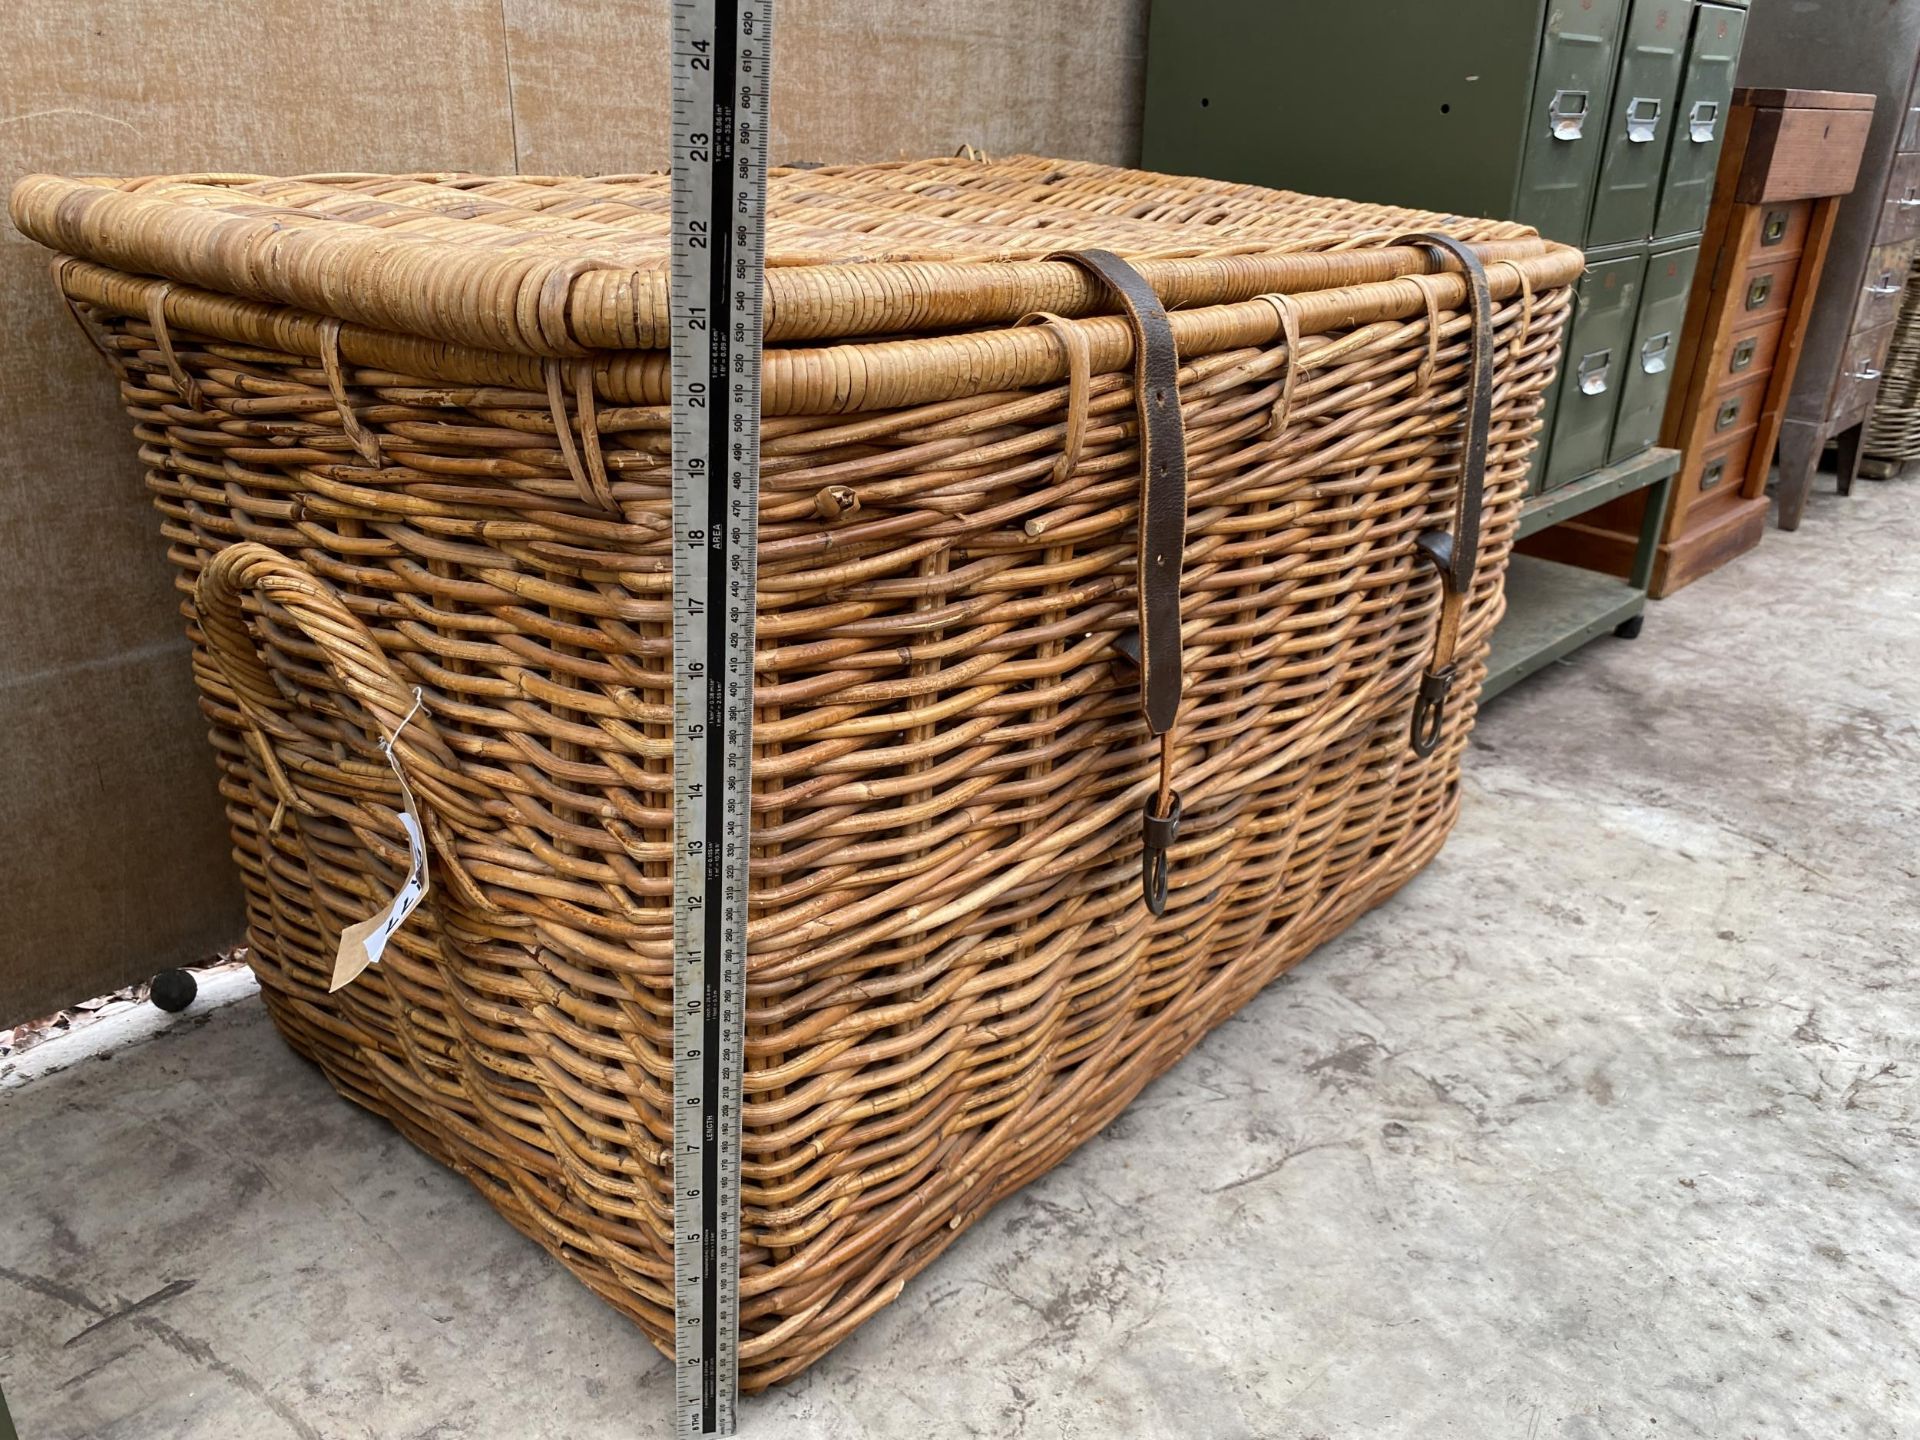 A LARGE WICKER LOG BASKET WITH HINGED LID AND LEATHER STRAPPING - Image 2 of 4